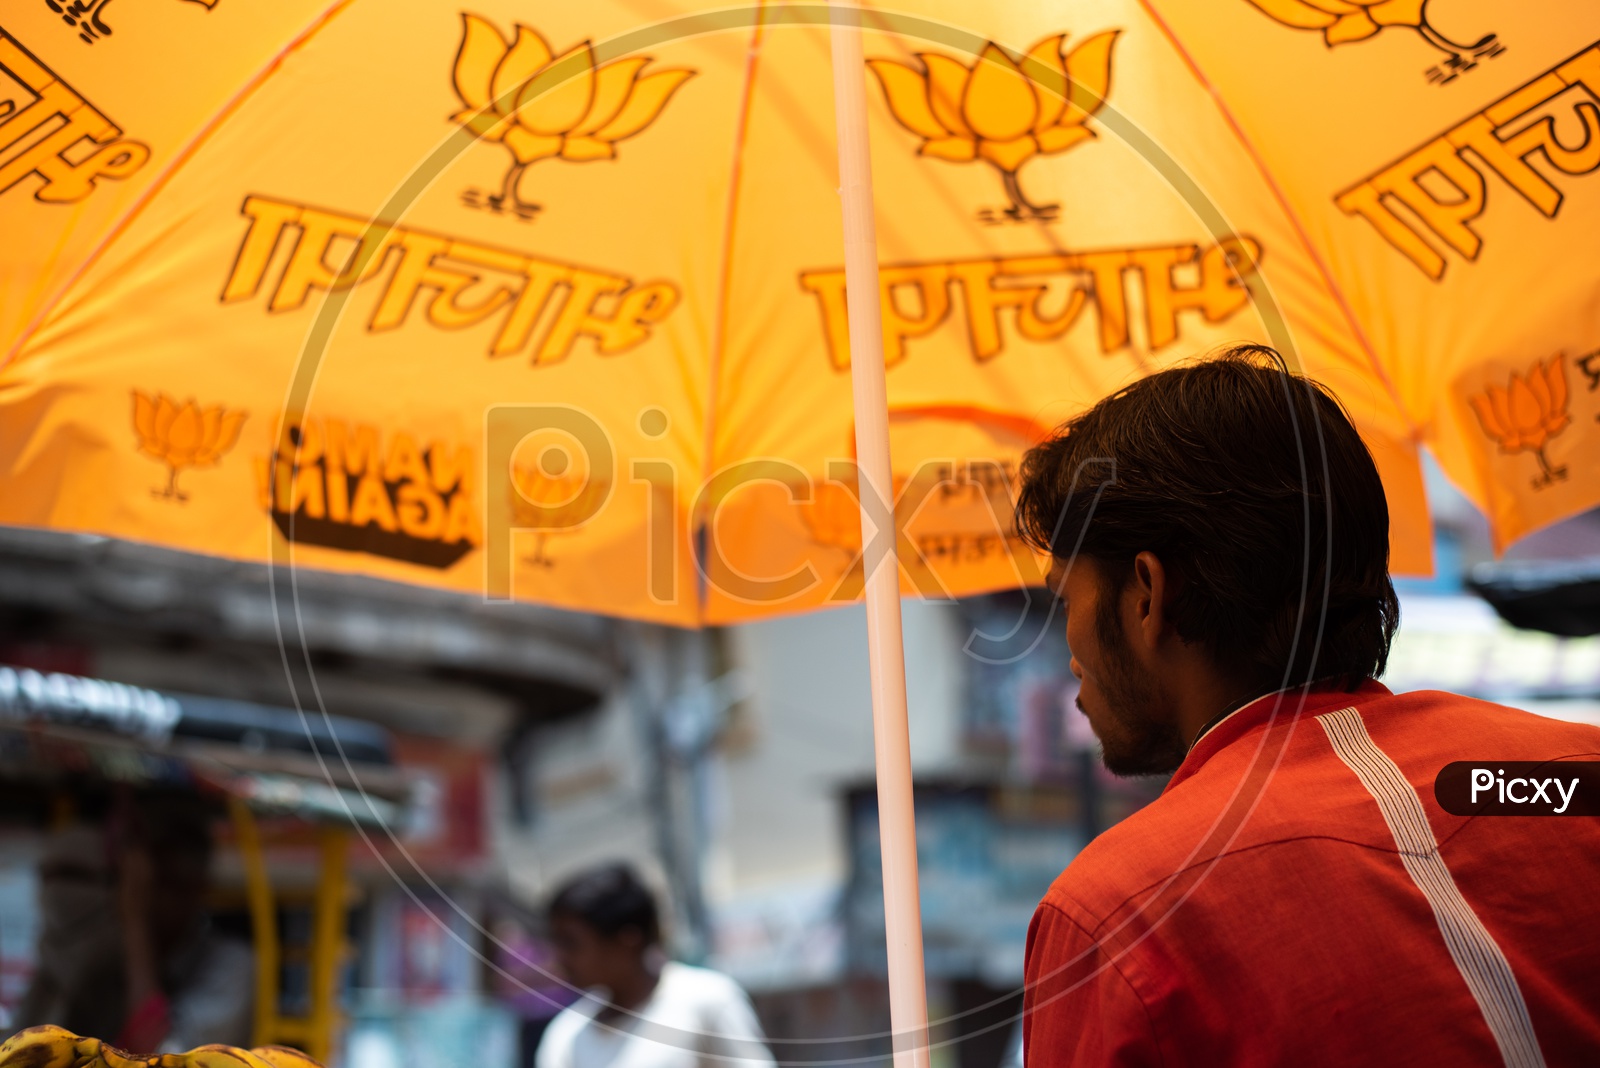 BJP Has Distributed  Umbrellas With BJP Party Symbols For Street Vendors  All Around Varanasi As Election Campaign  For  Lok sabha Election 2019